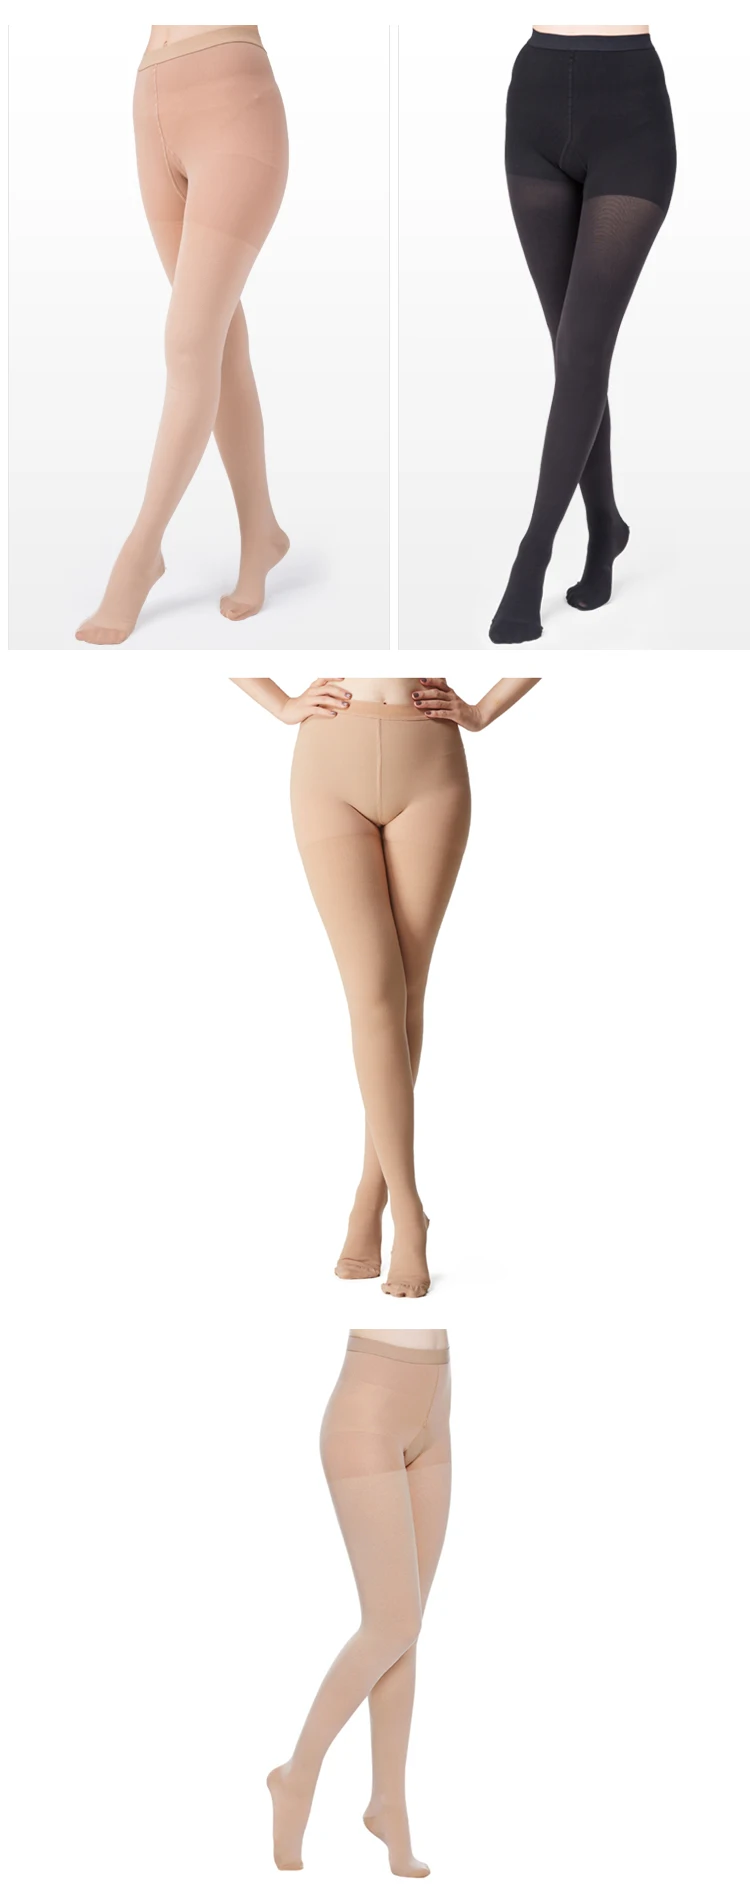 Compression Stockings Medical Thigh High Open Toe 20--30mmHG